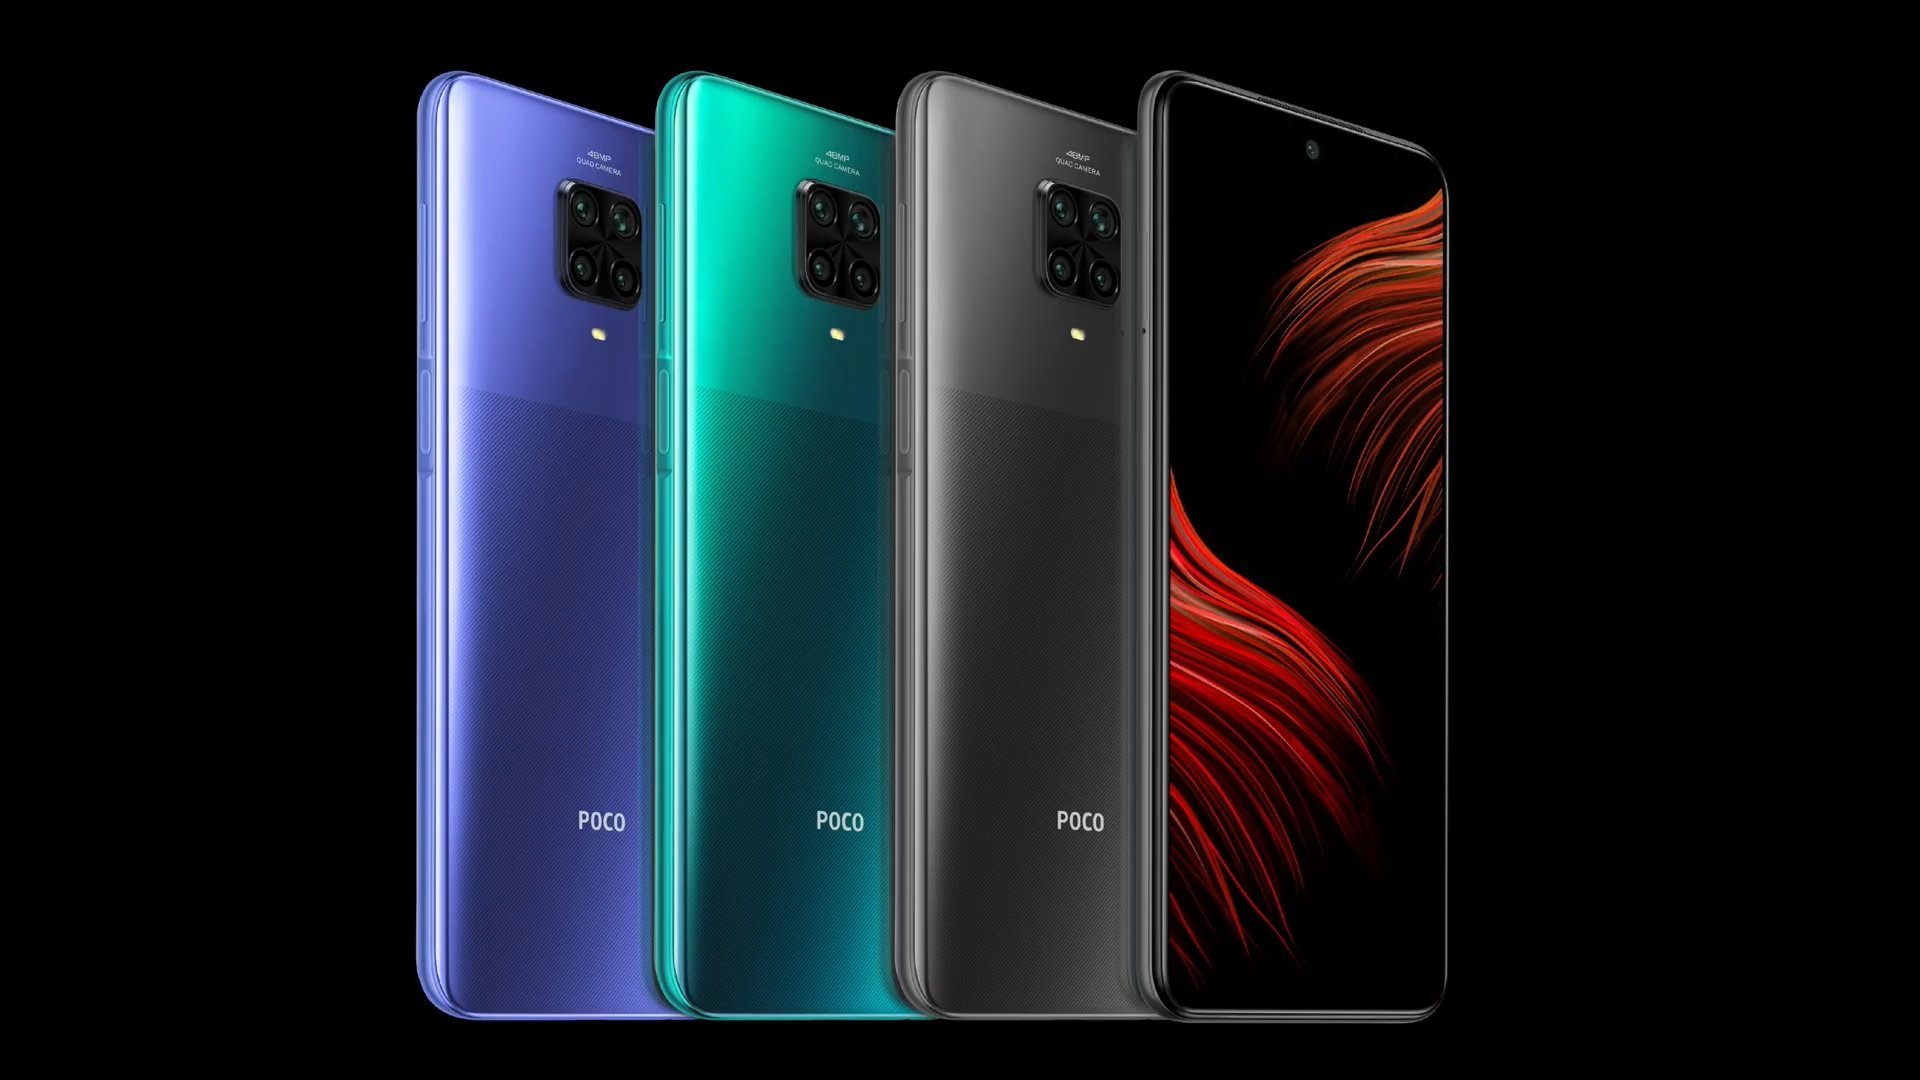 Xiaomi finally pushes Poco M2 Pro to Android 11 more than a year after release